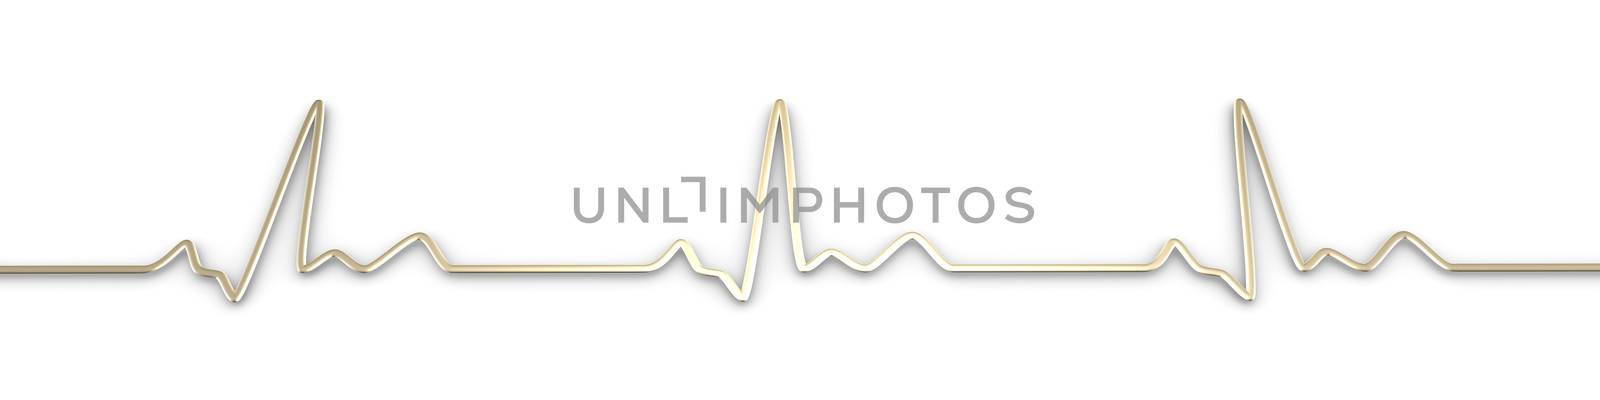 3D rendered Illustration. Heartbeat graph.
